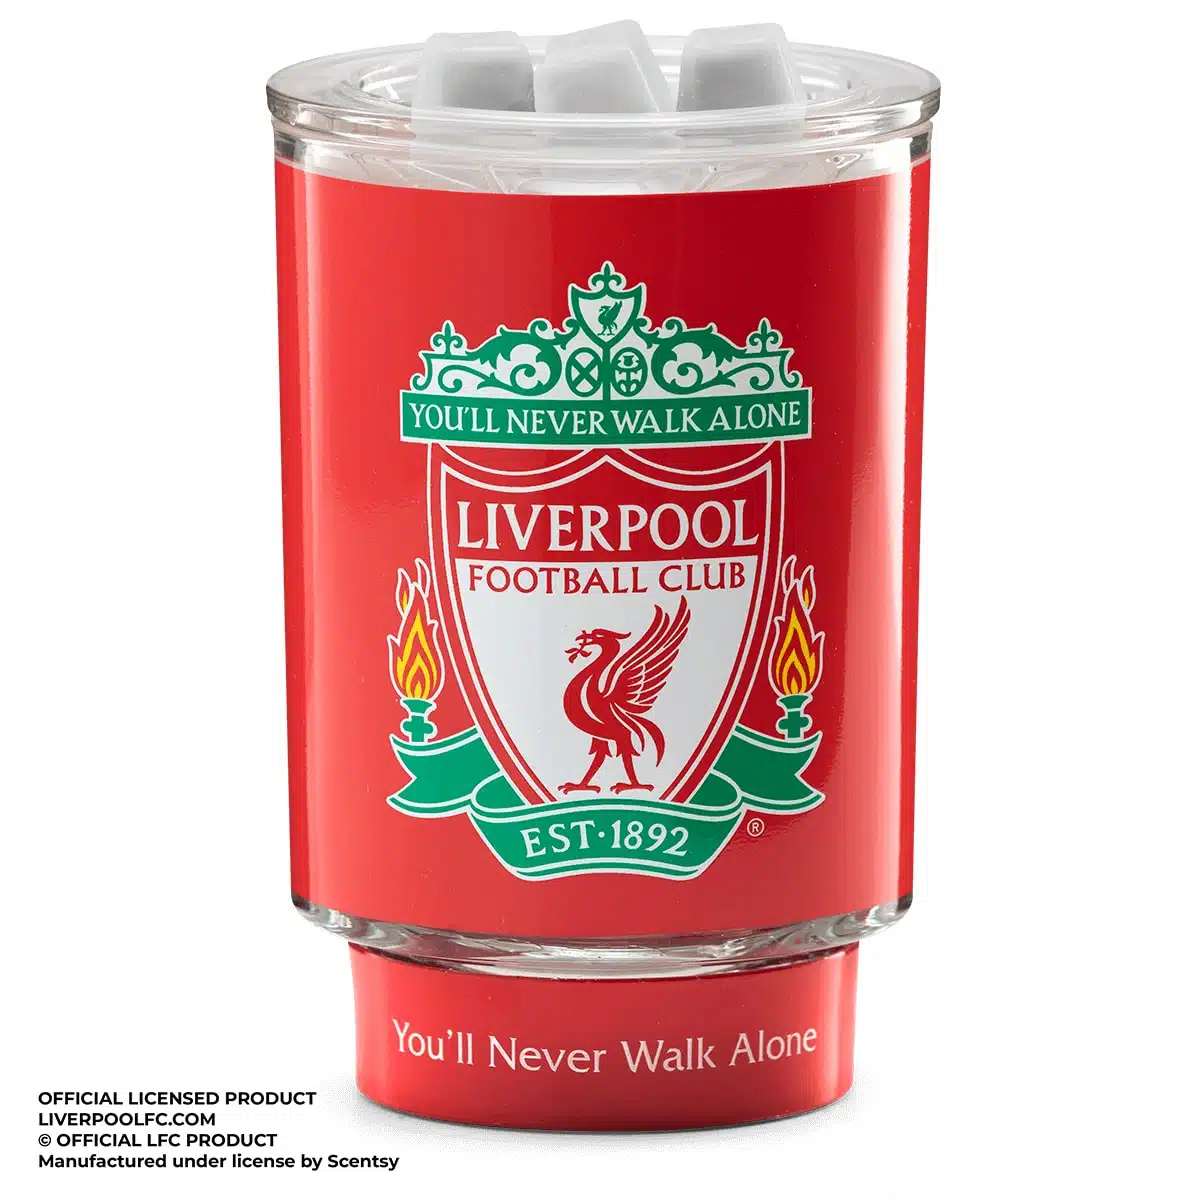 https://www.thecandleboutique.co.uk/wp-content/uploads/2022/11/Liverpool-FC-Scentsy-Warmer-With-Wax-Off.jpg